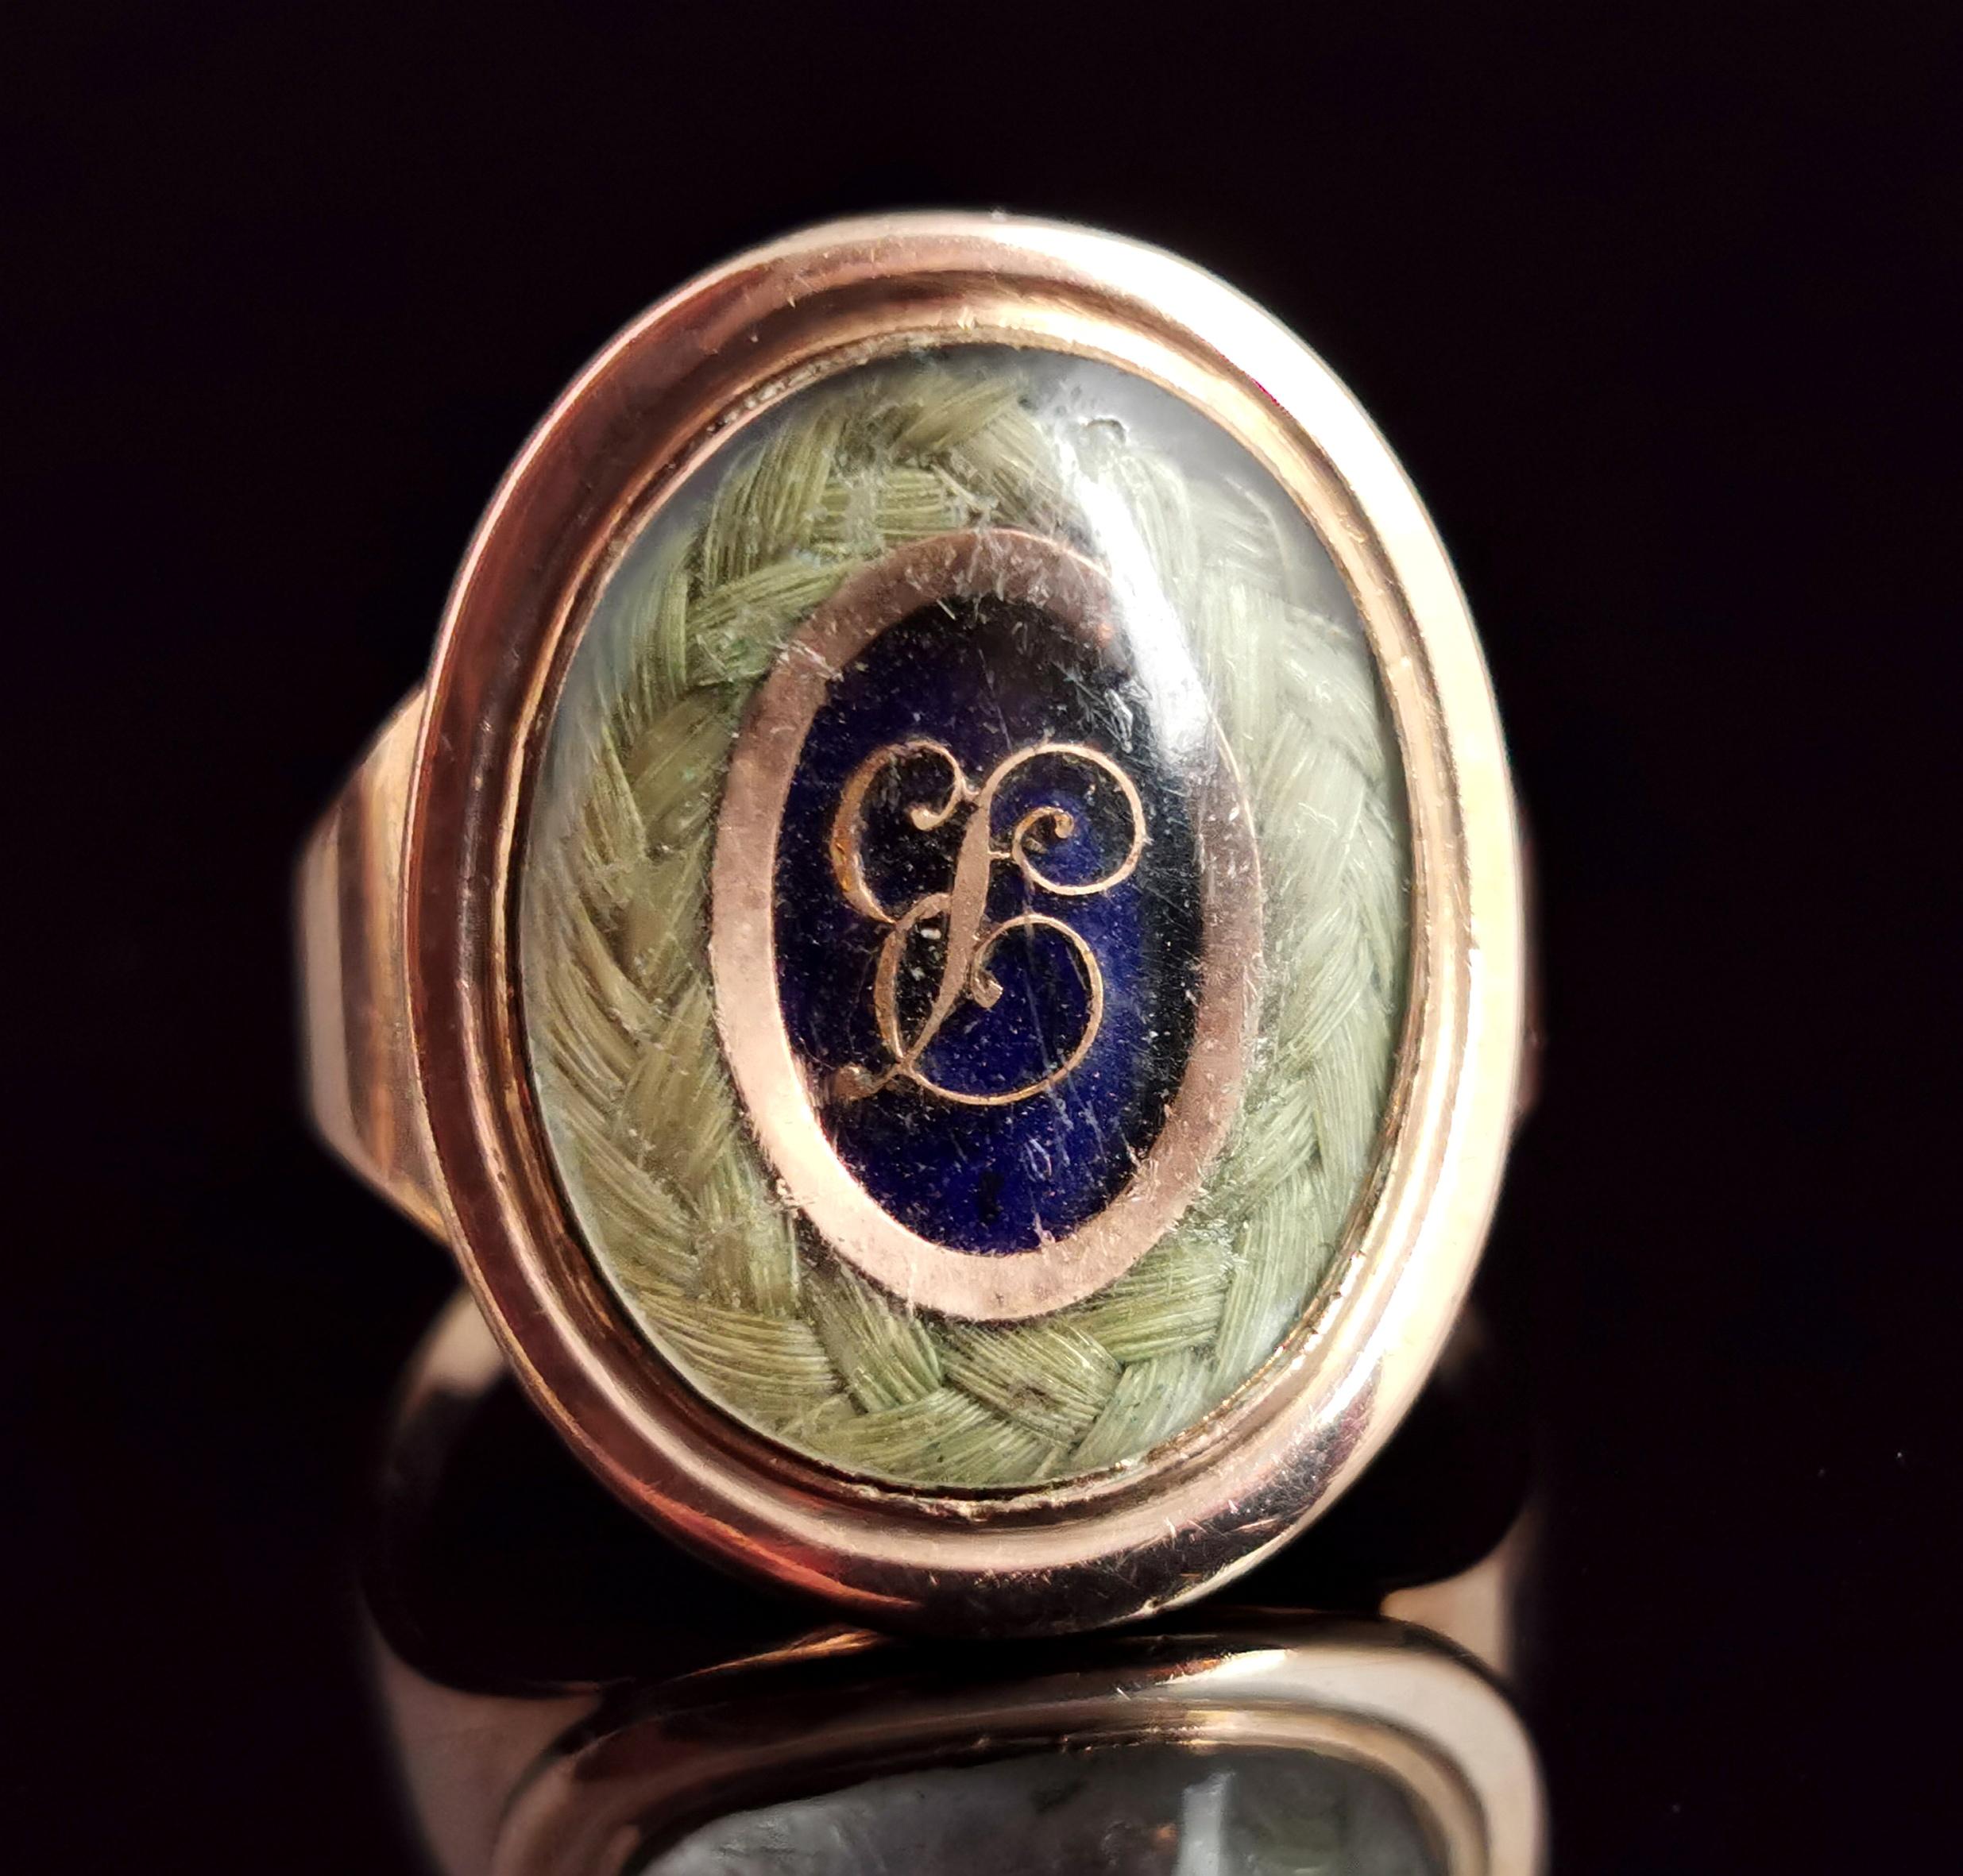 A beautiful antique Georgian era, late 18th century mourning ring.

It features a beautiful large oval face housing a lock of plaited dark blonde hair bordering a cobalt blue enamel plaque with applied rose gold lettering.

The slightly domed